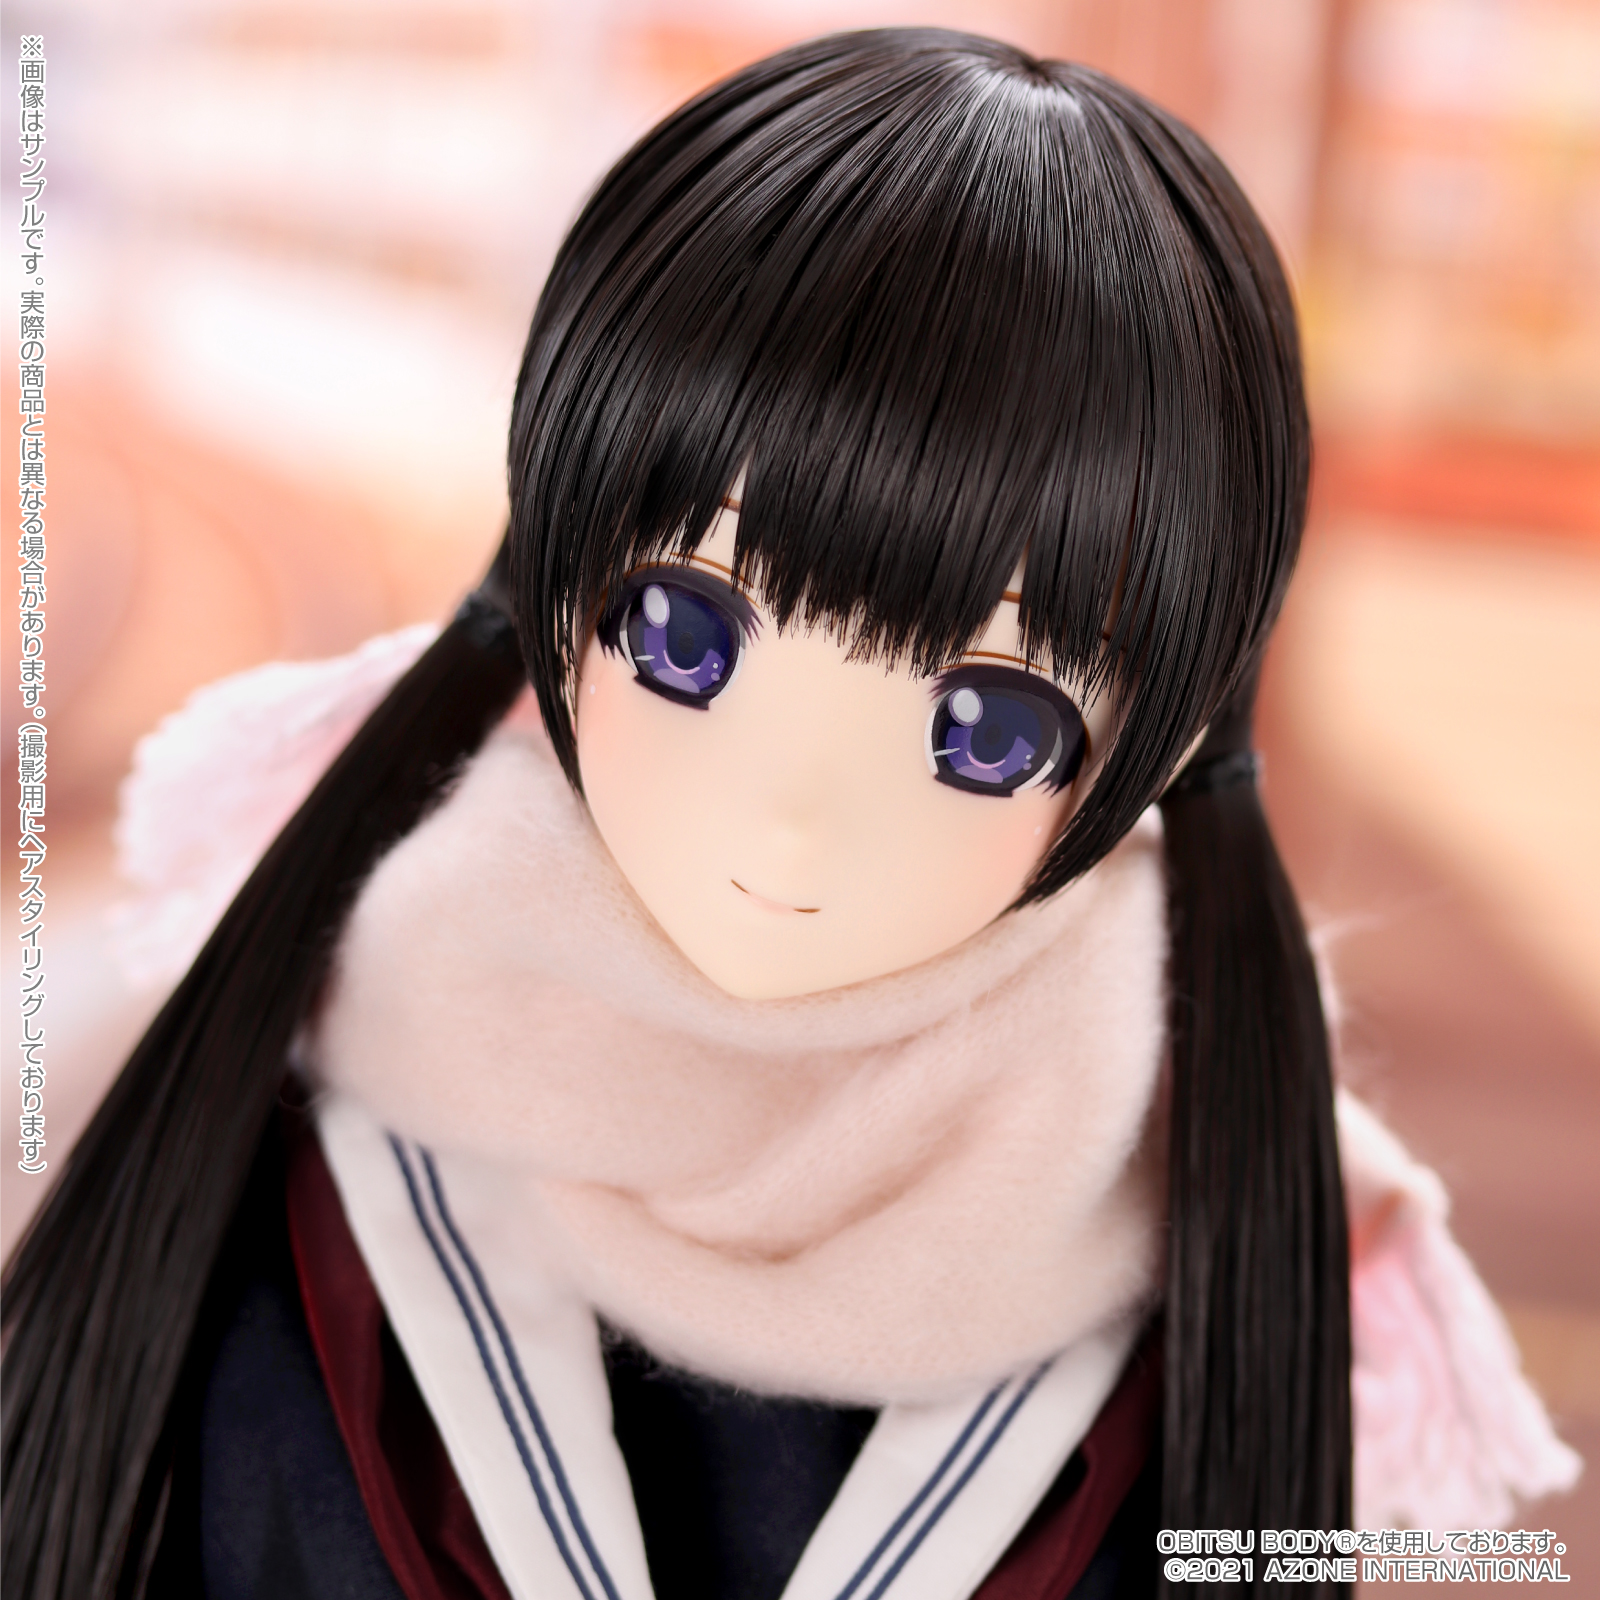 Happiness Clover 和遥キナ学校制服コレクション『和遥清心女子学園ver./まひろ』ハピネスクローバー 1/3 完成品ドール-010